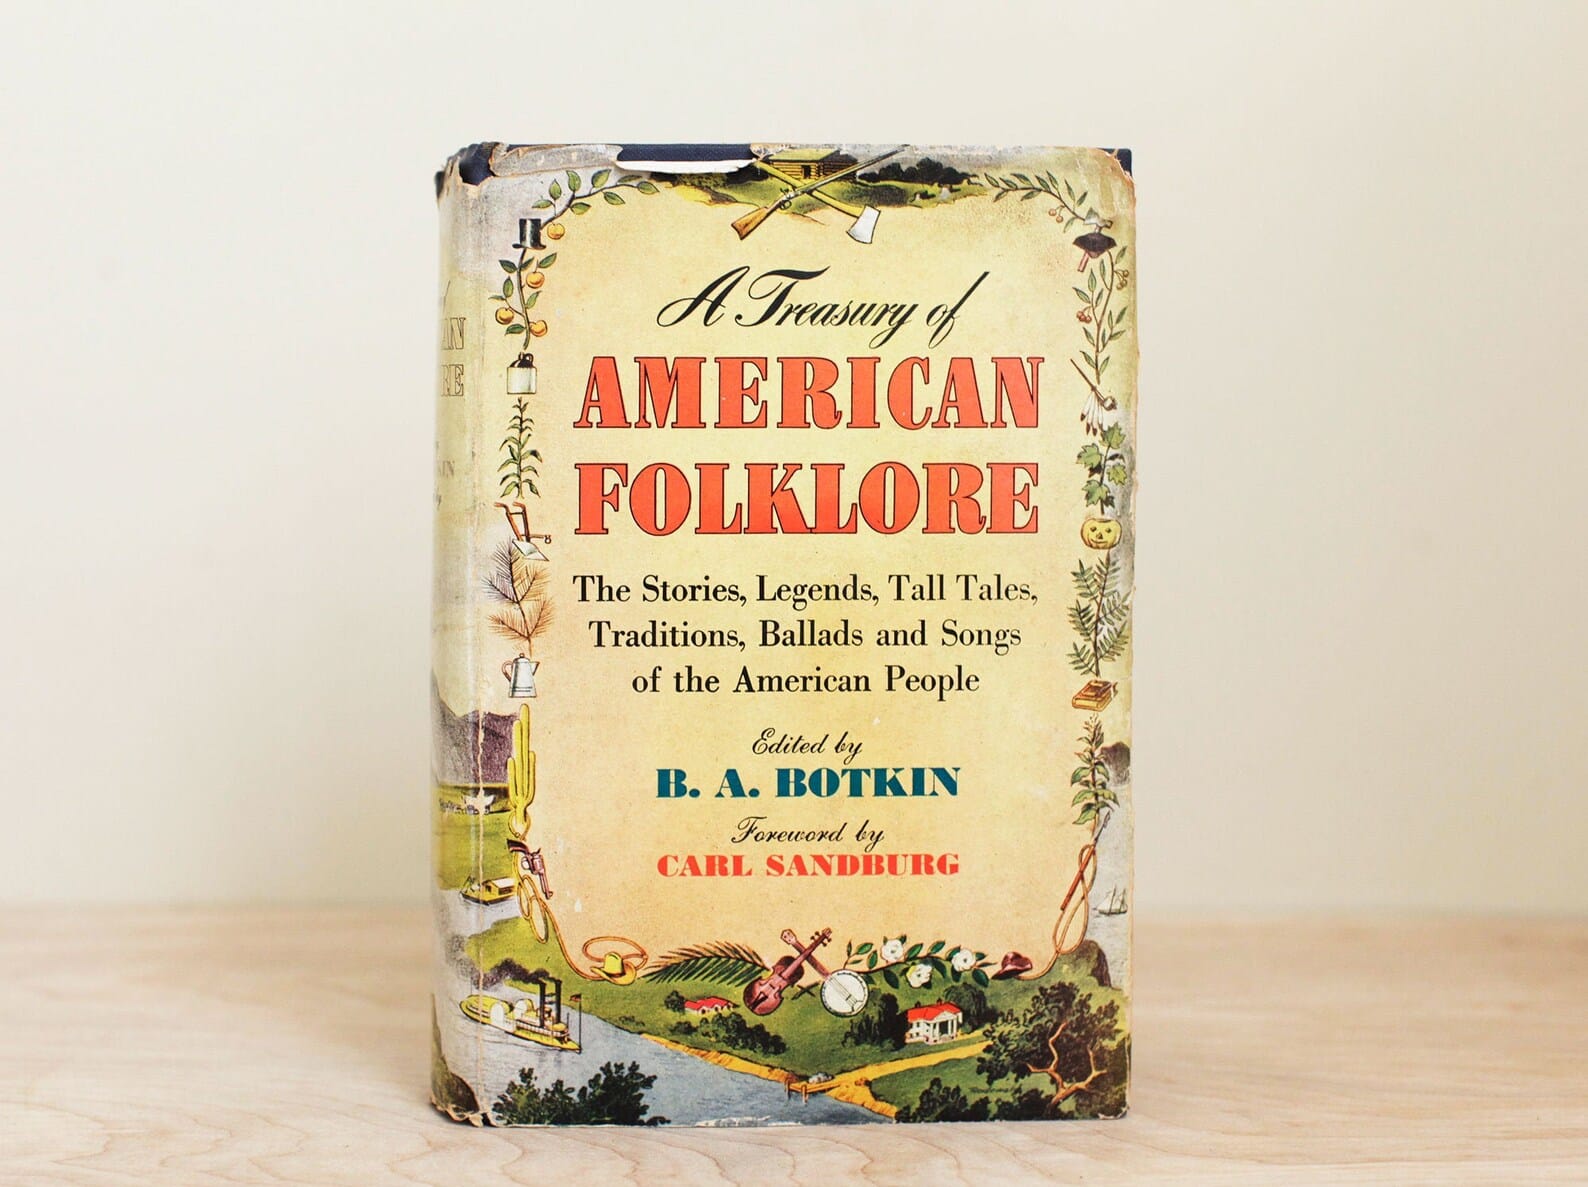 Book cover with the title, subtitle and contributor details in a central panel surrounding by an illustration of rural/rustic scenery and scenes.